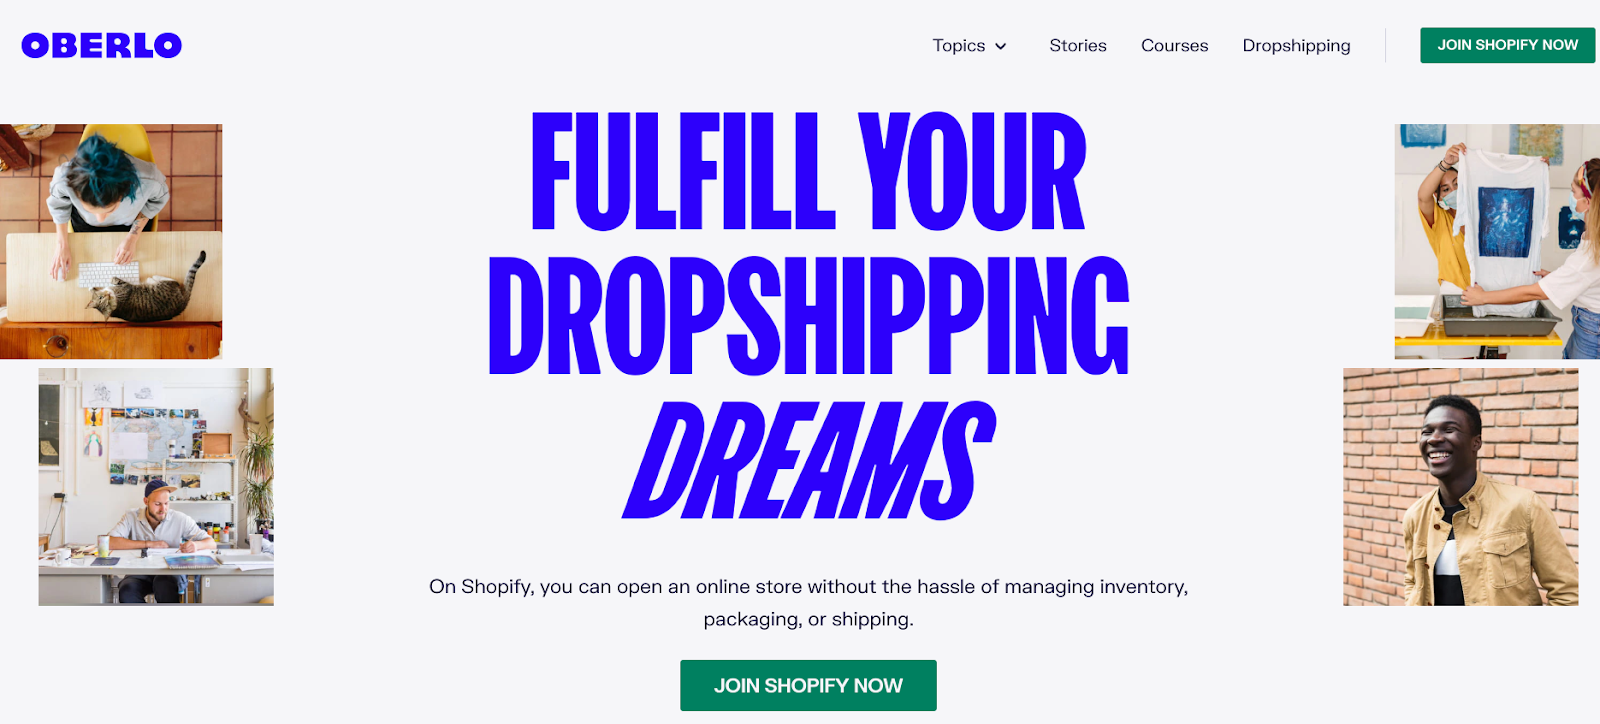 fulfill your  dropshipping dreams with oberlo